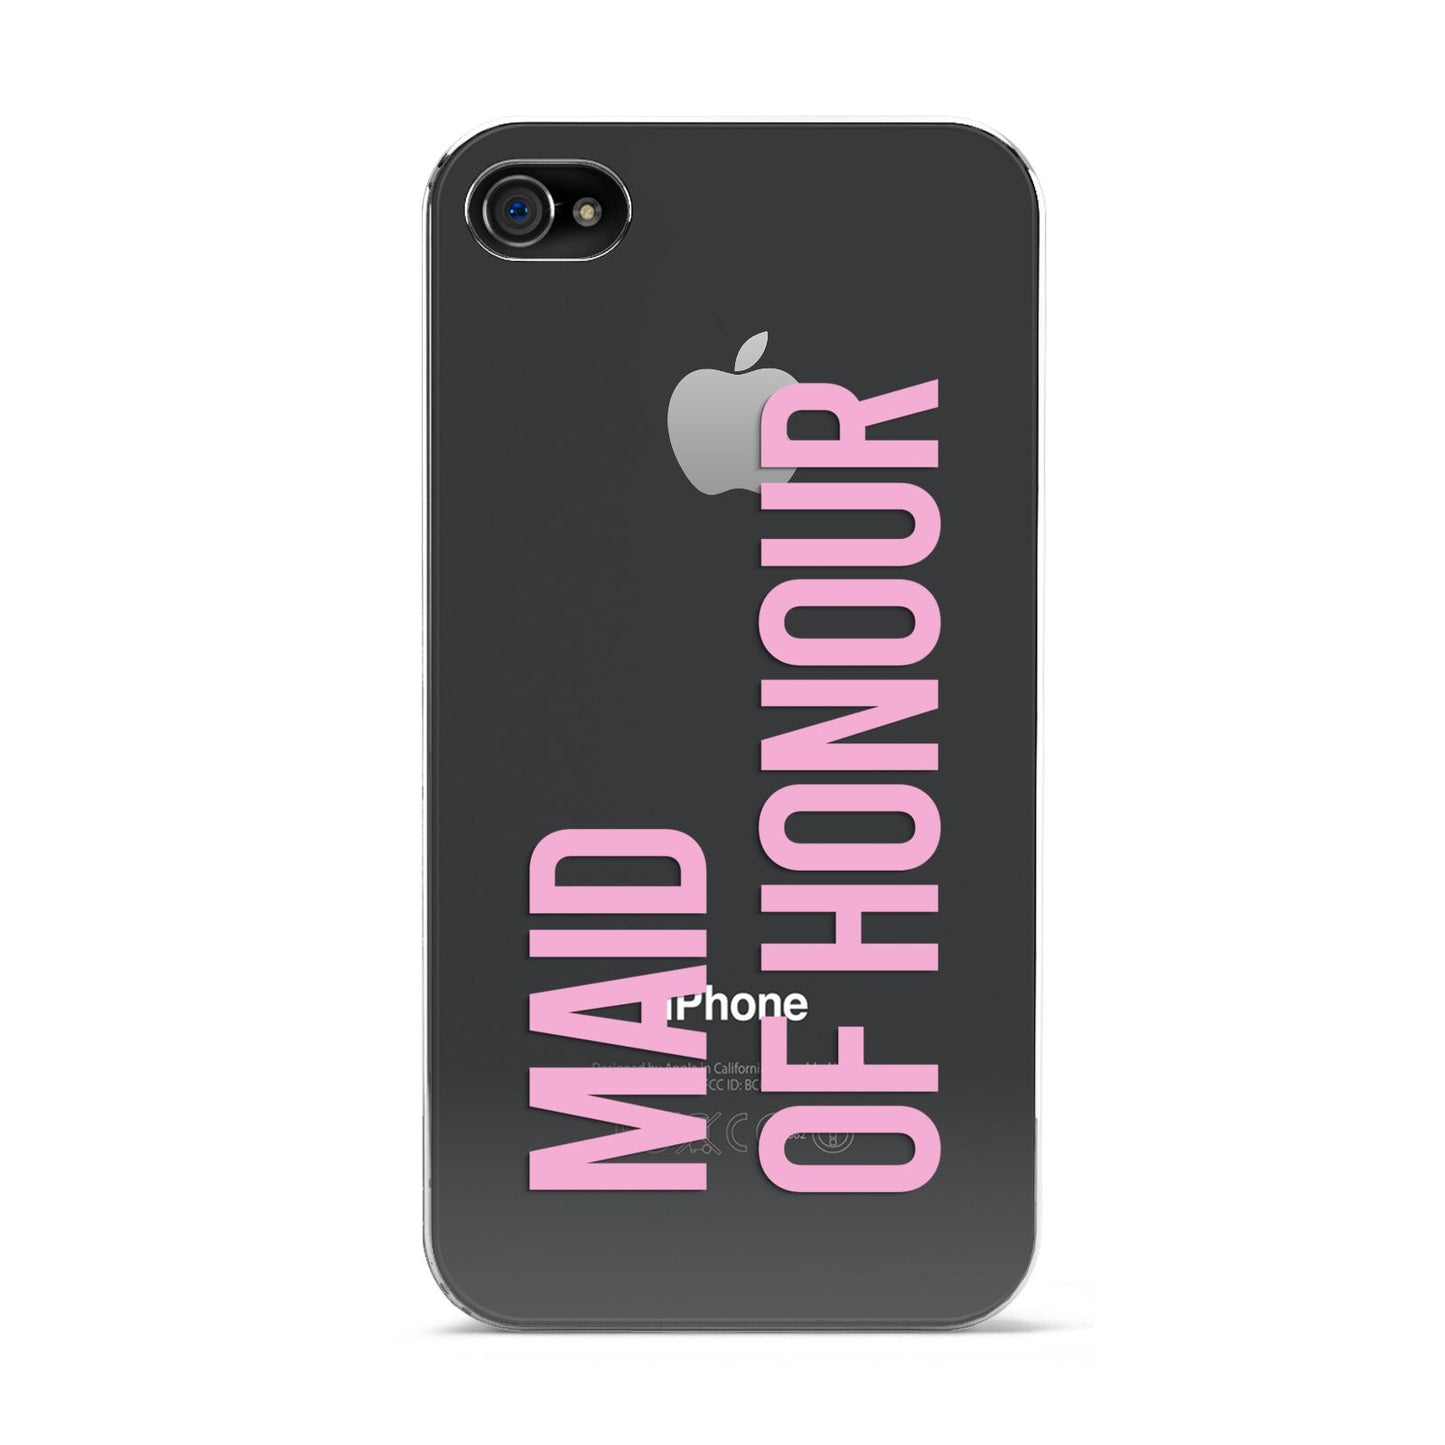 Maid of Honour Apple iPhone 4s Case